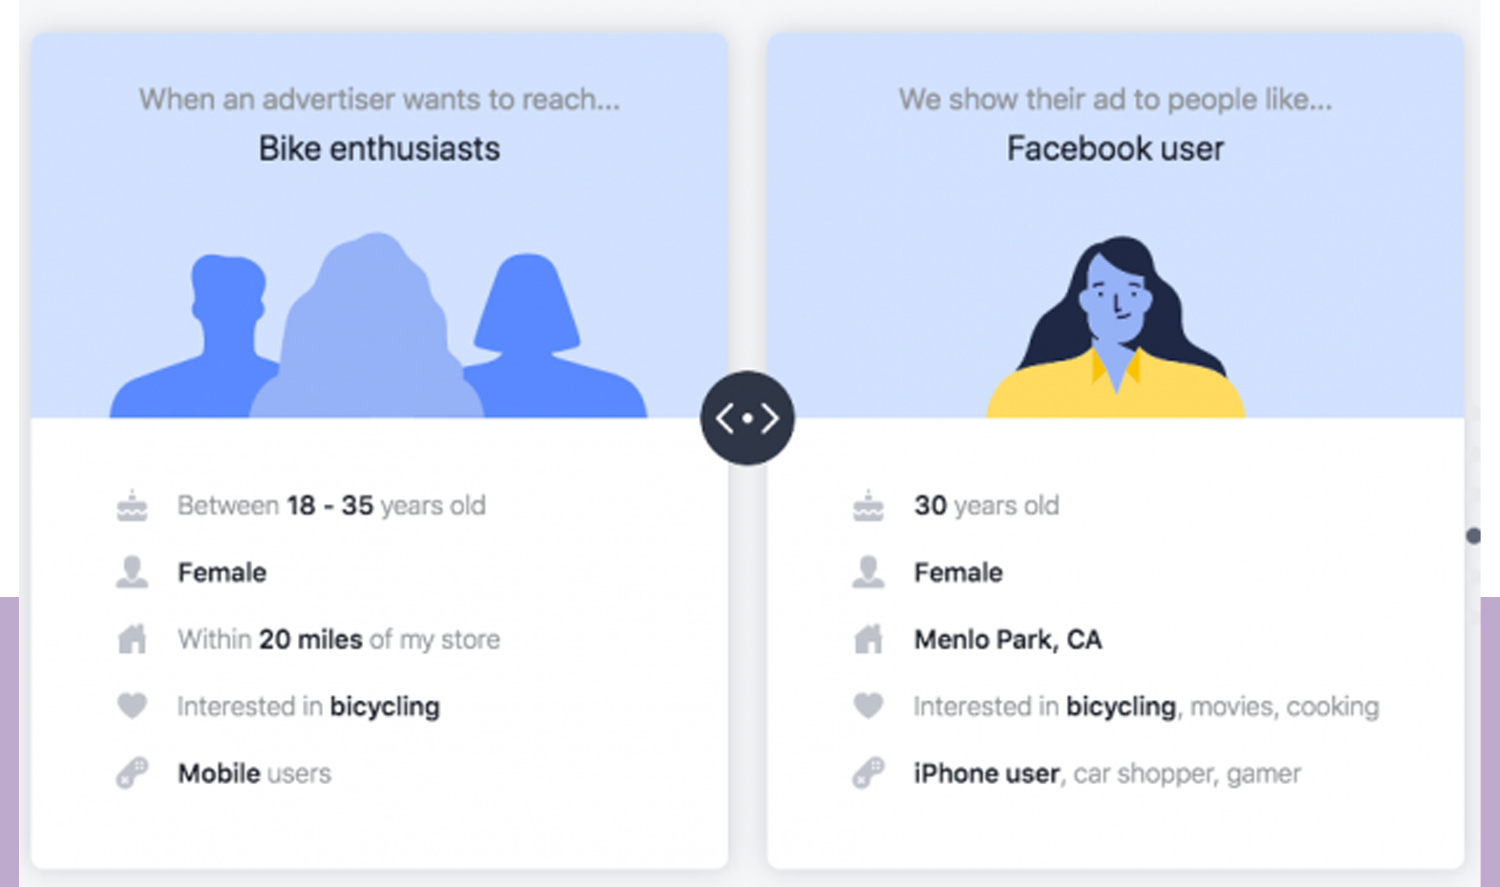 Use precise ad targeting on Facebook to connect with the right audience.